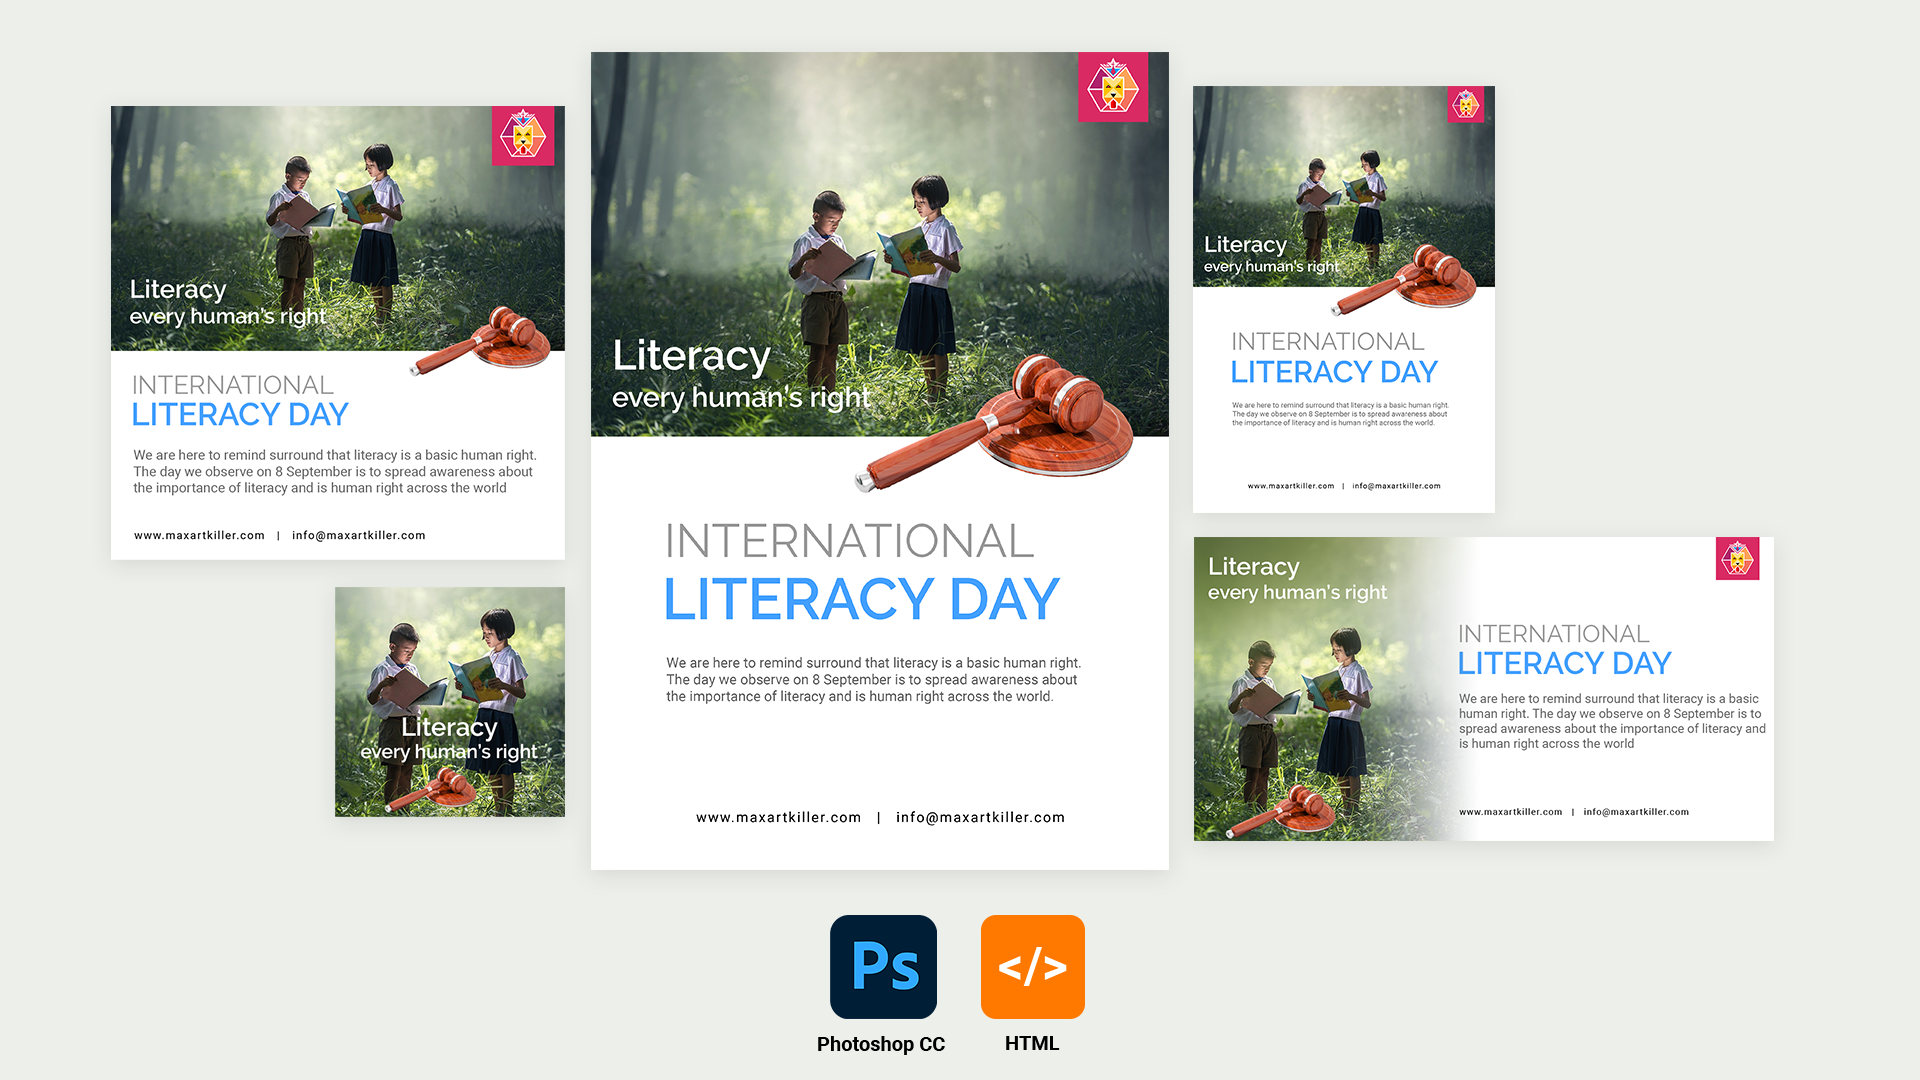 International Literacy Day is an international observance, celebrated each year on 8 September